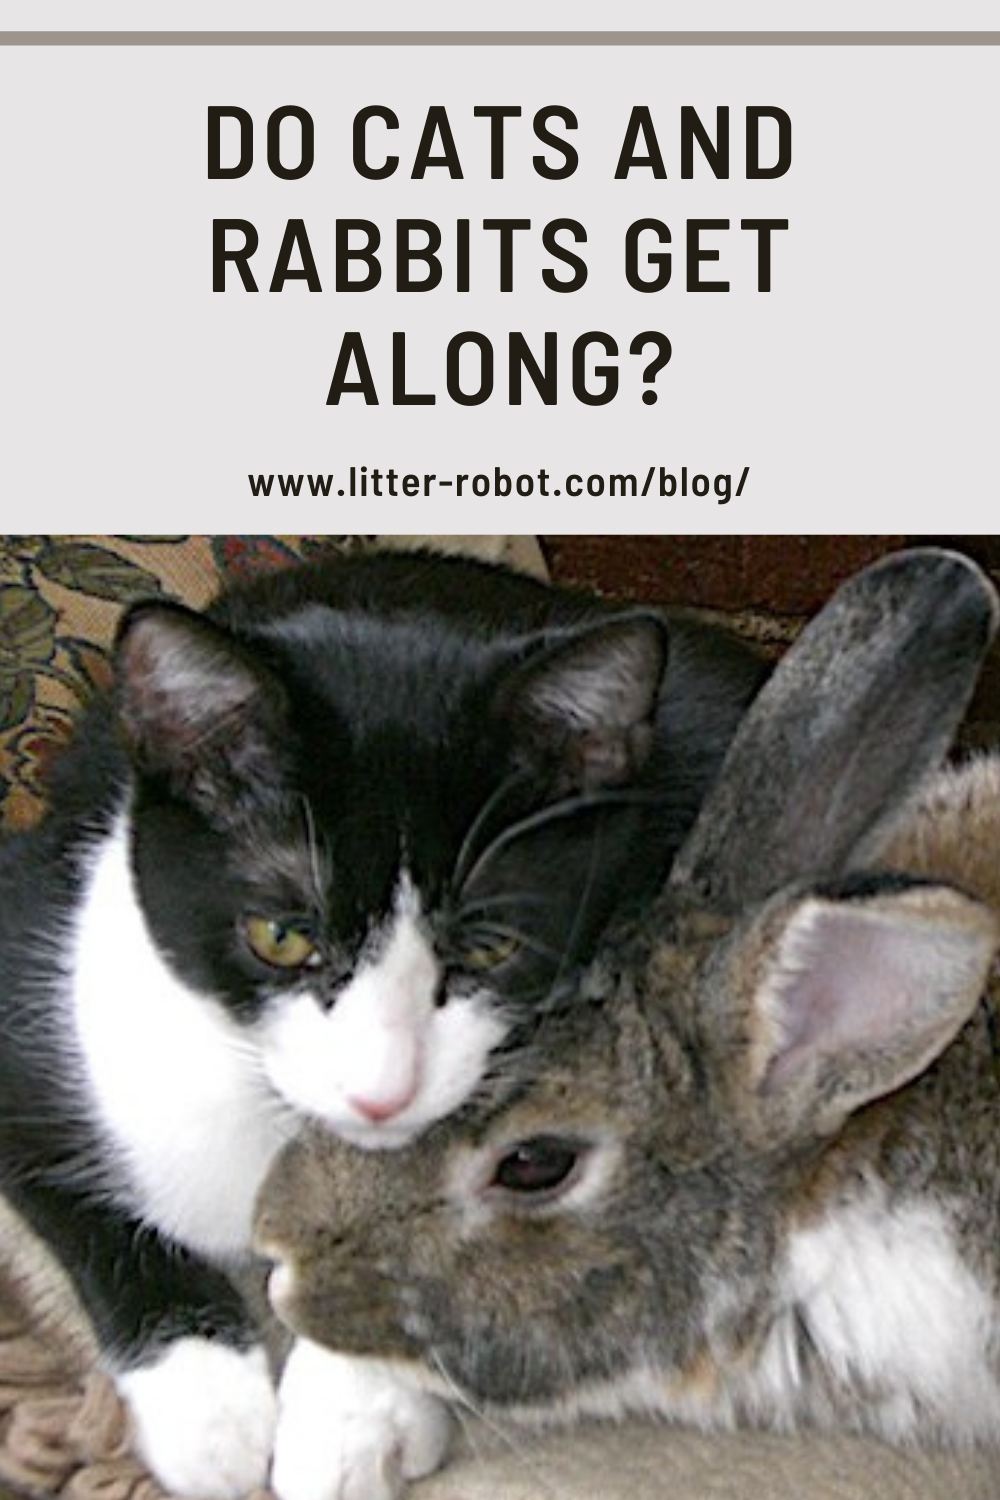 Do Cats and Rabbits Get Along? Learn more on LitterRobot Blog